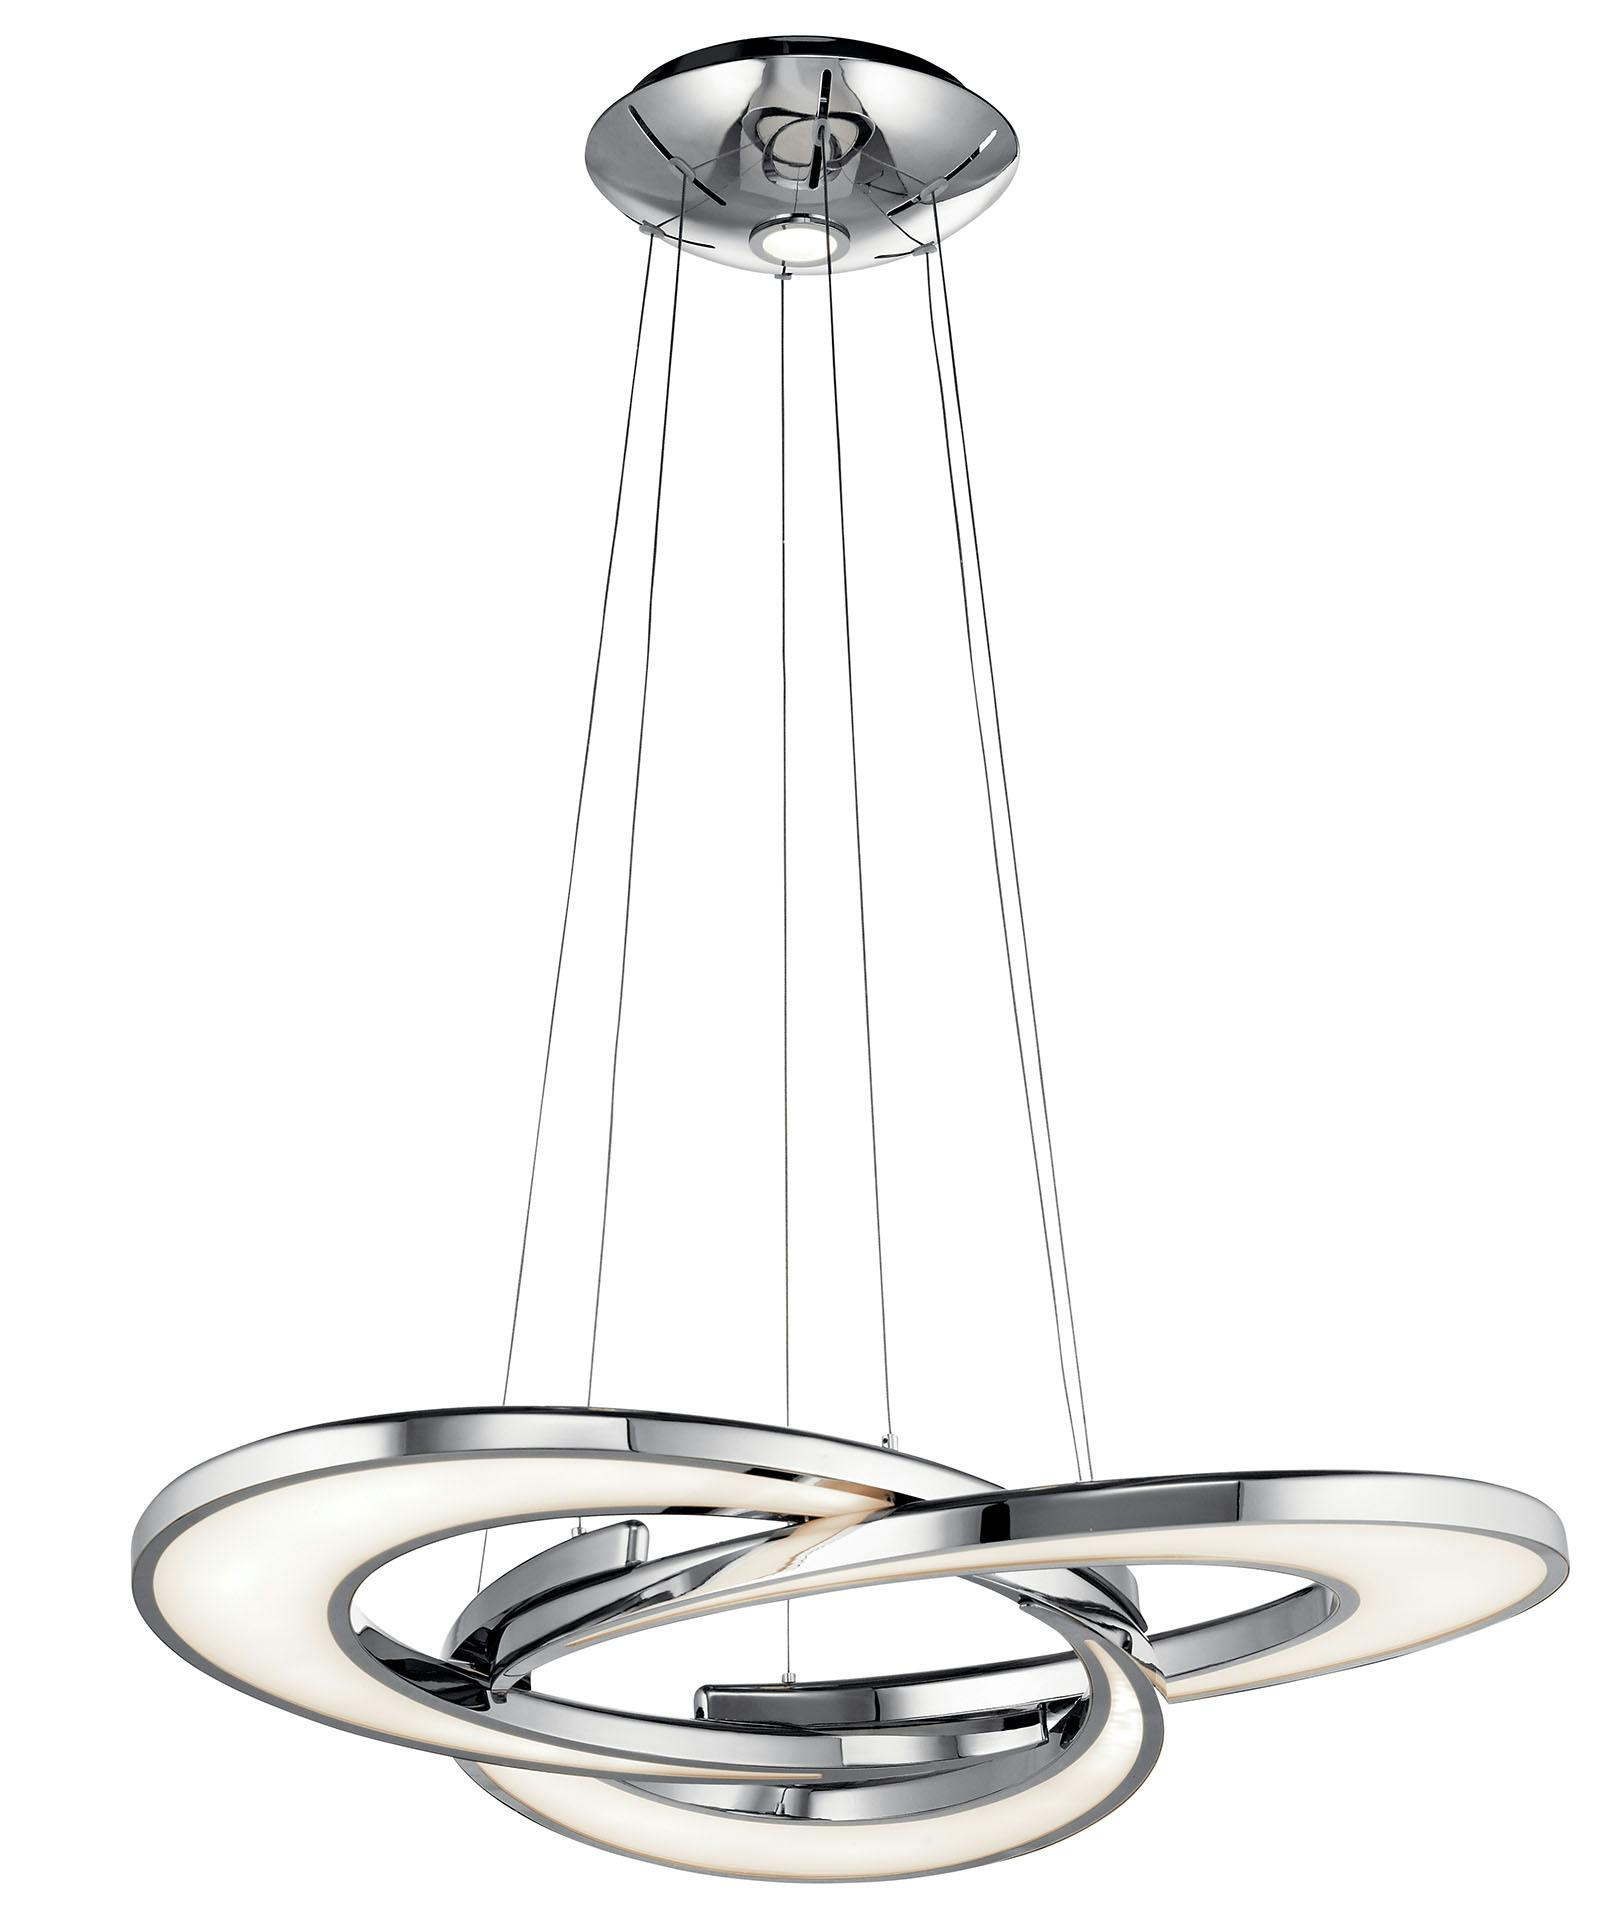 Destiny LED Chandelier in Chrome on a white background